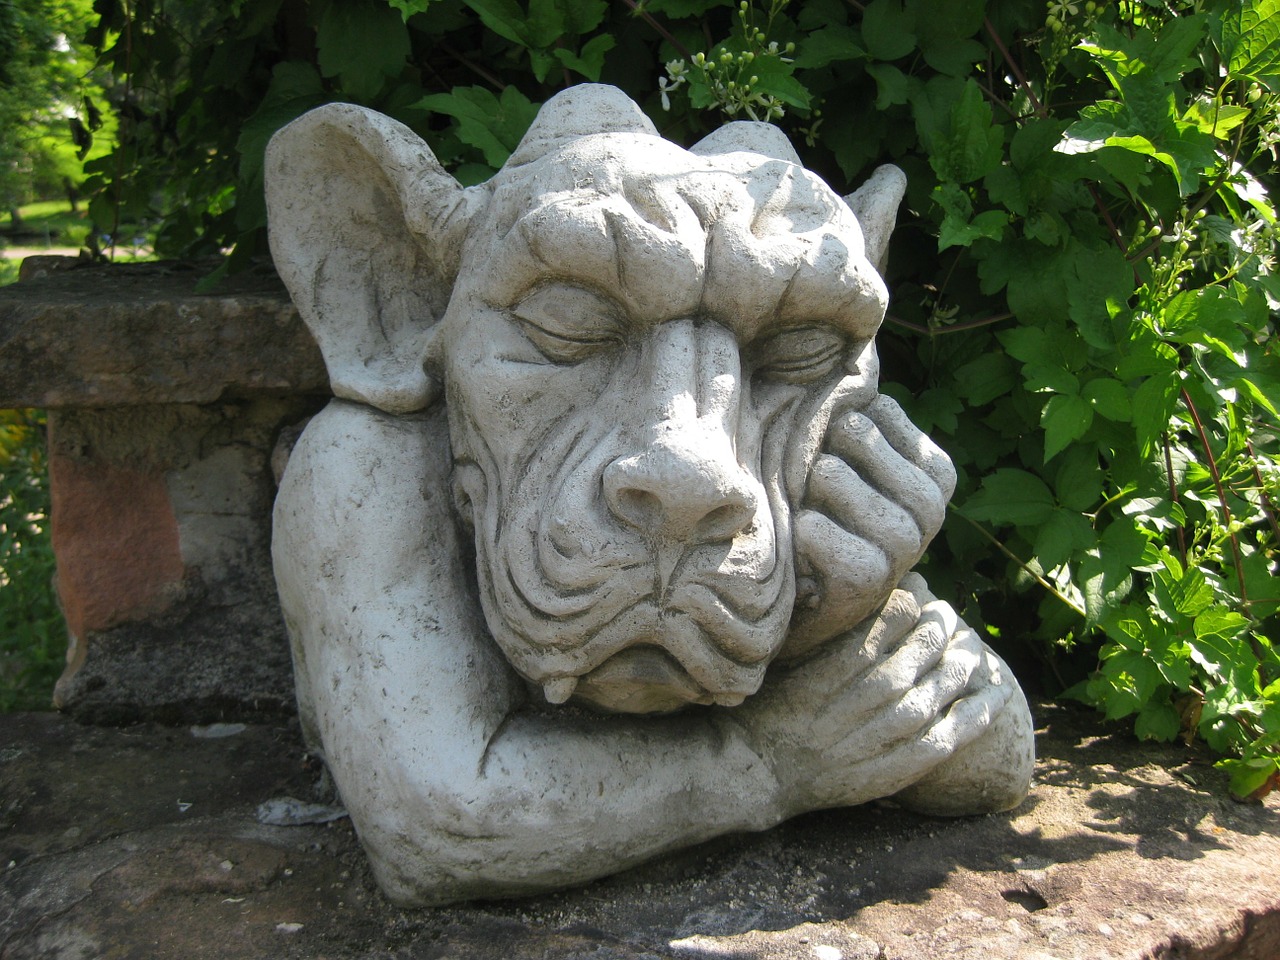 stone figure making a face garden figurines free photo